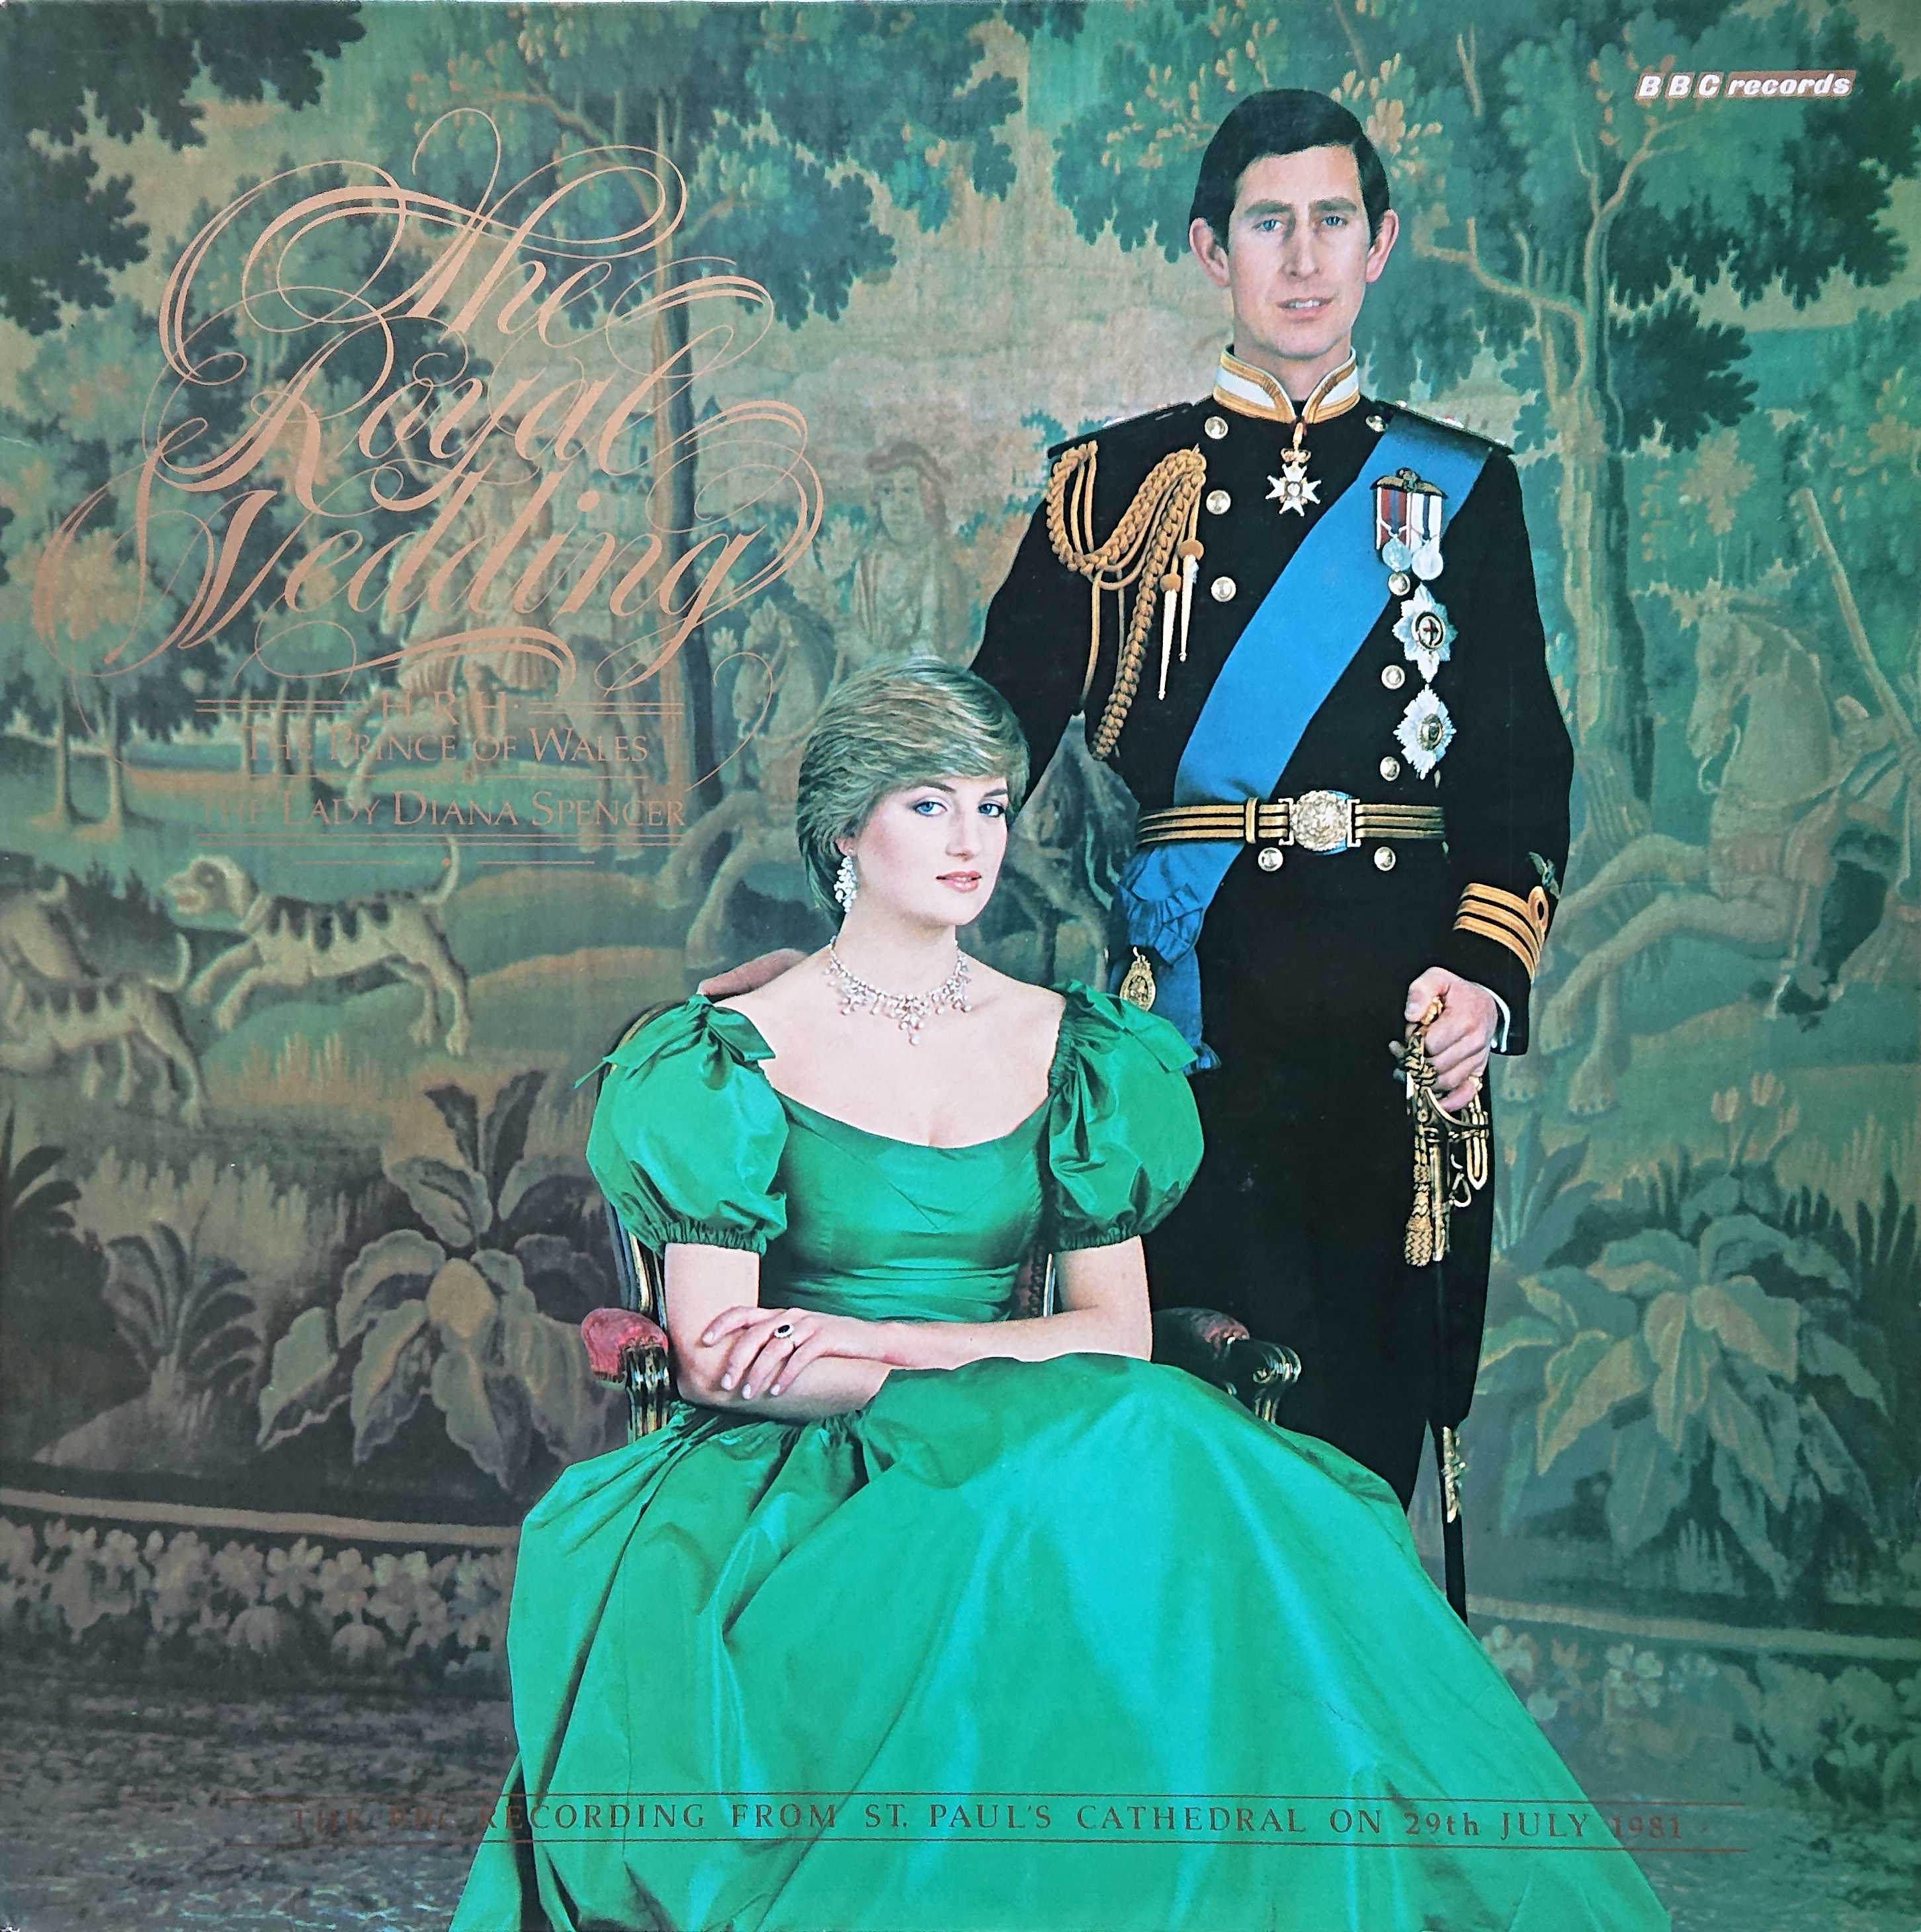 Picture of REP 413-iD The royal wedding - Prince Charles / Diana Spencer (Dutch import) by artist Various from the BBC albums - Records and Tapes library